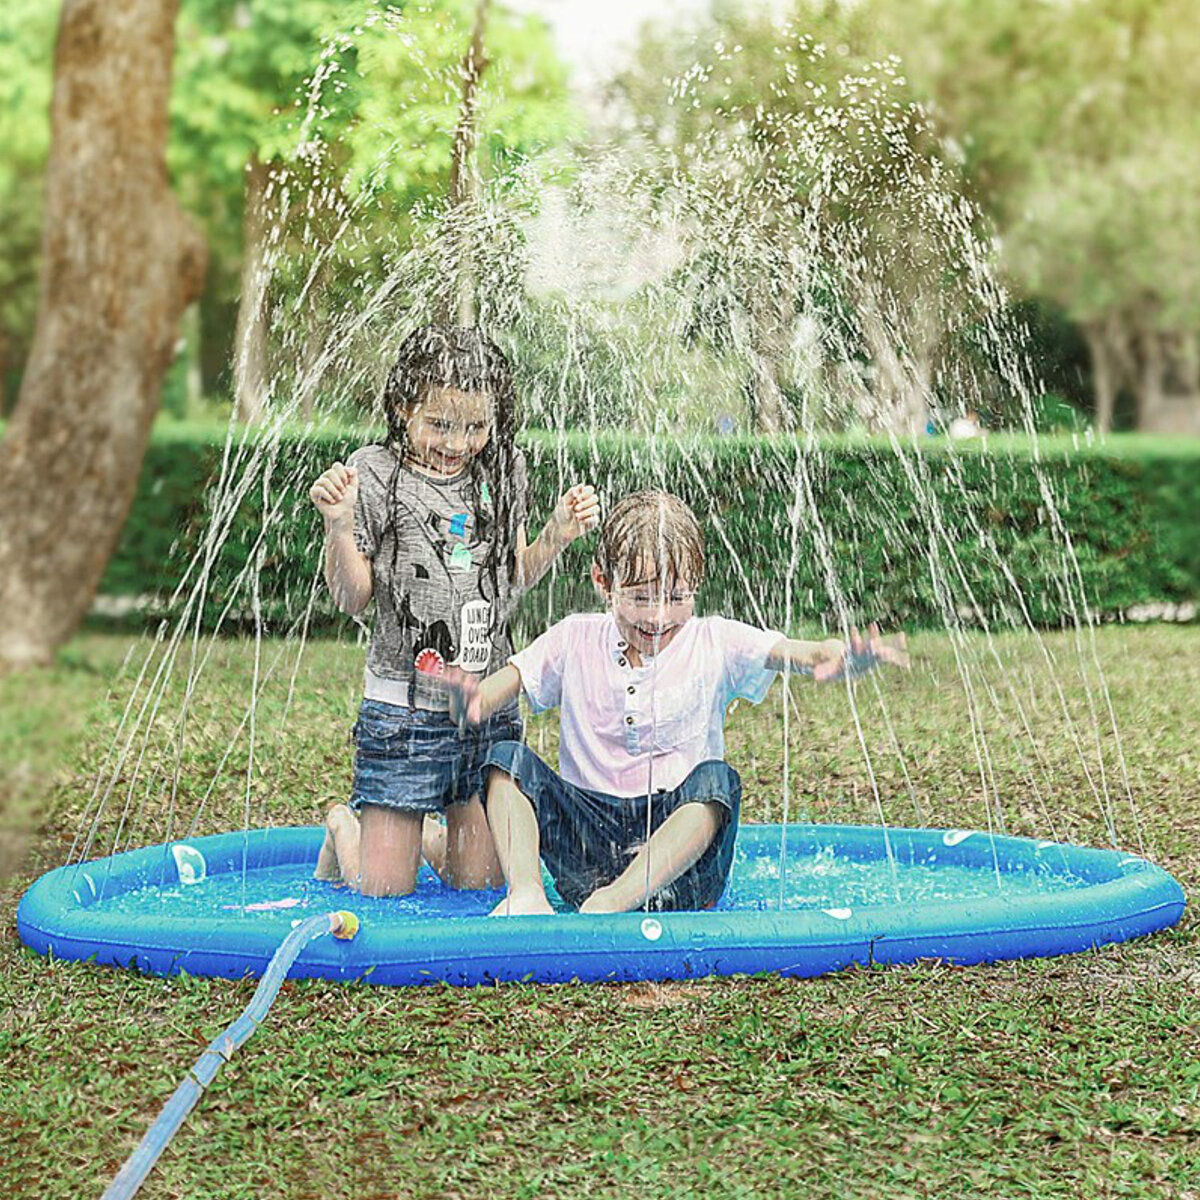 

170cm Inflatable Spray Water Mat Summer Children's Game Mat Lawn Pad Sprinkler Outdoor Swimming Pool